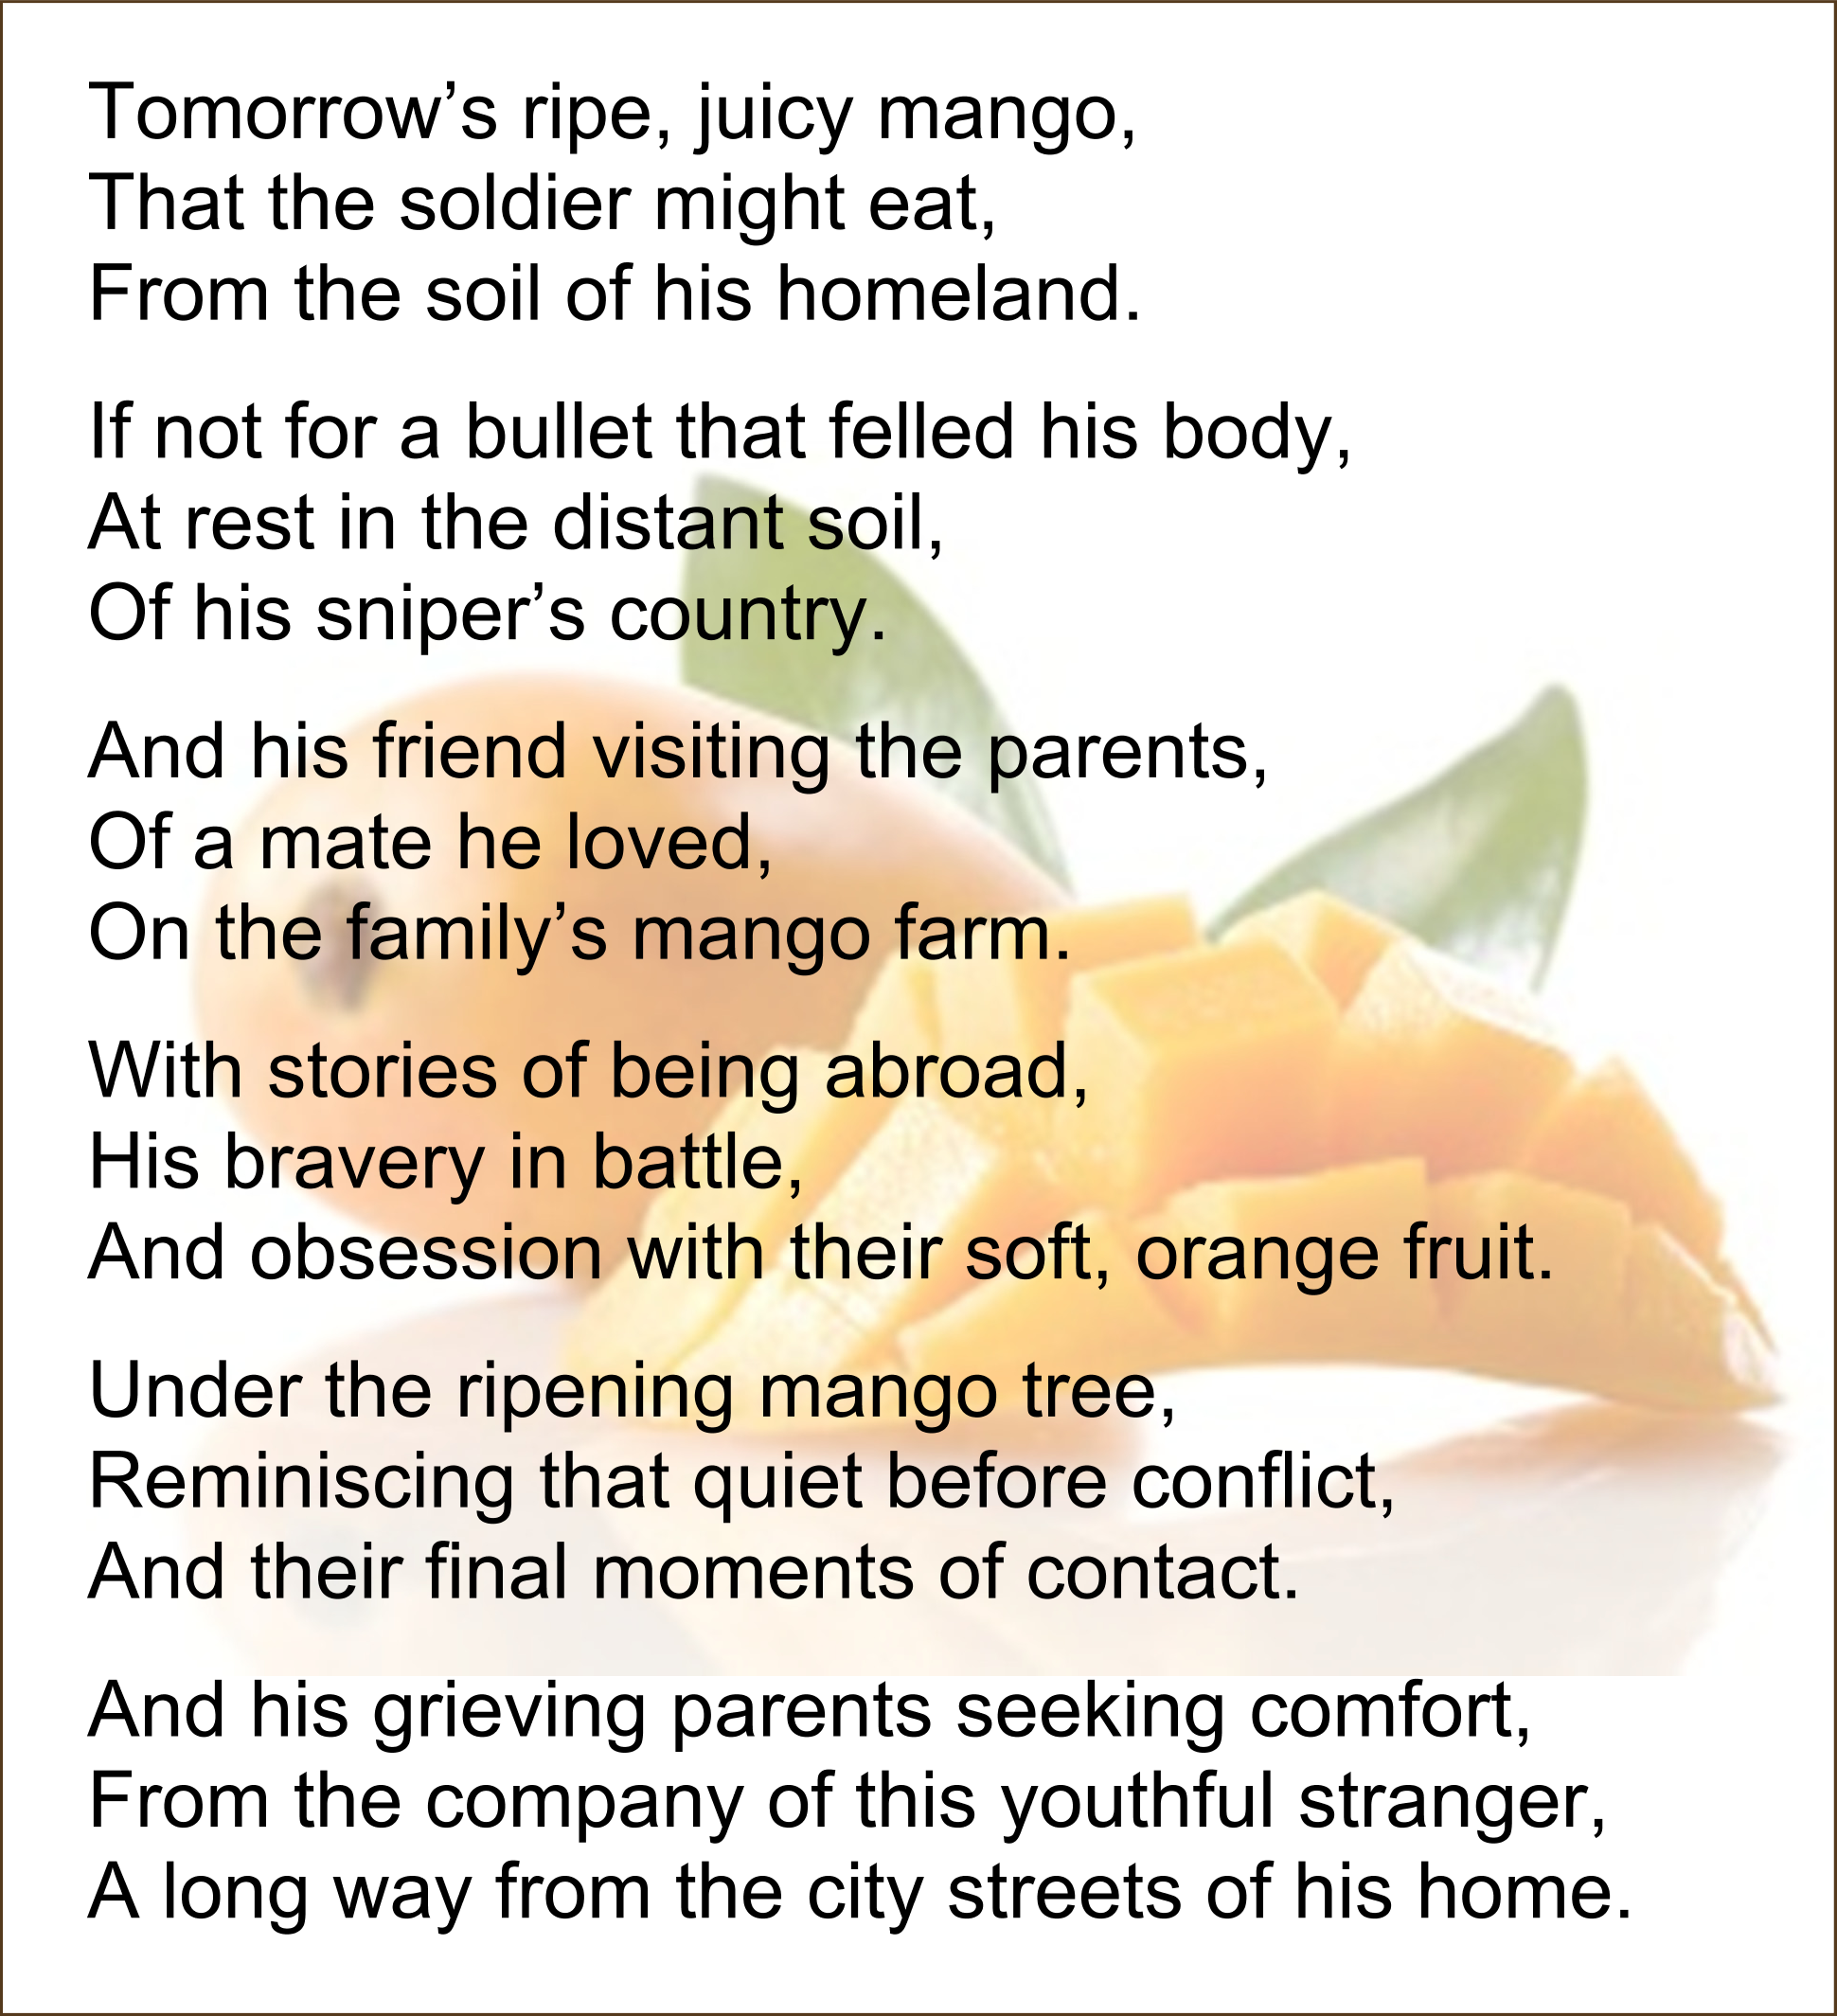 Poem over picture of a mango